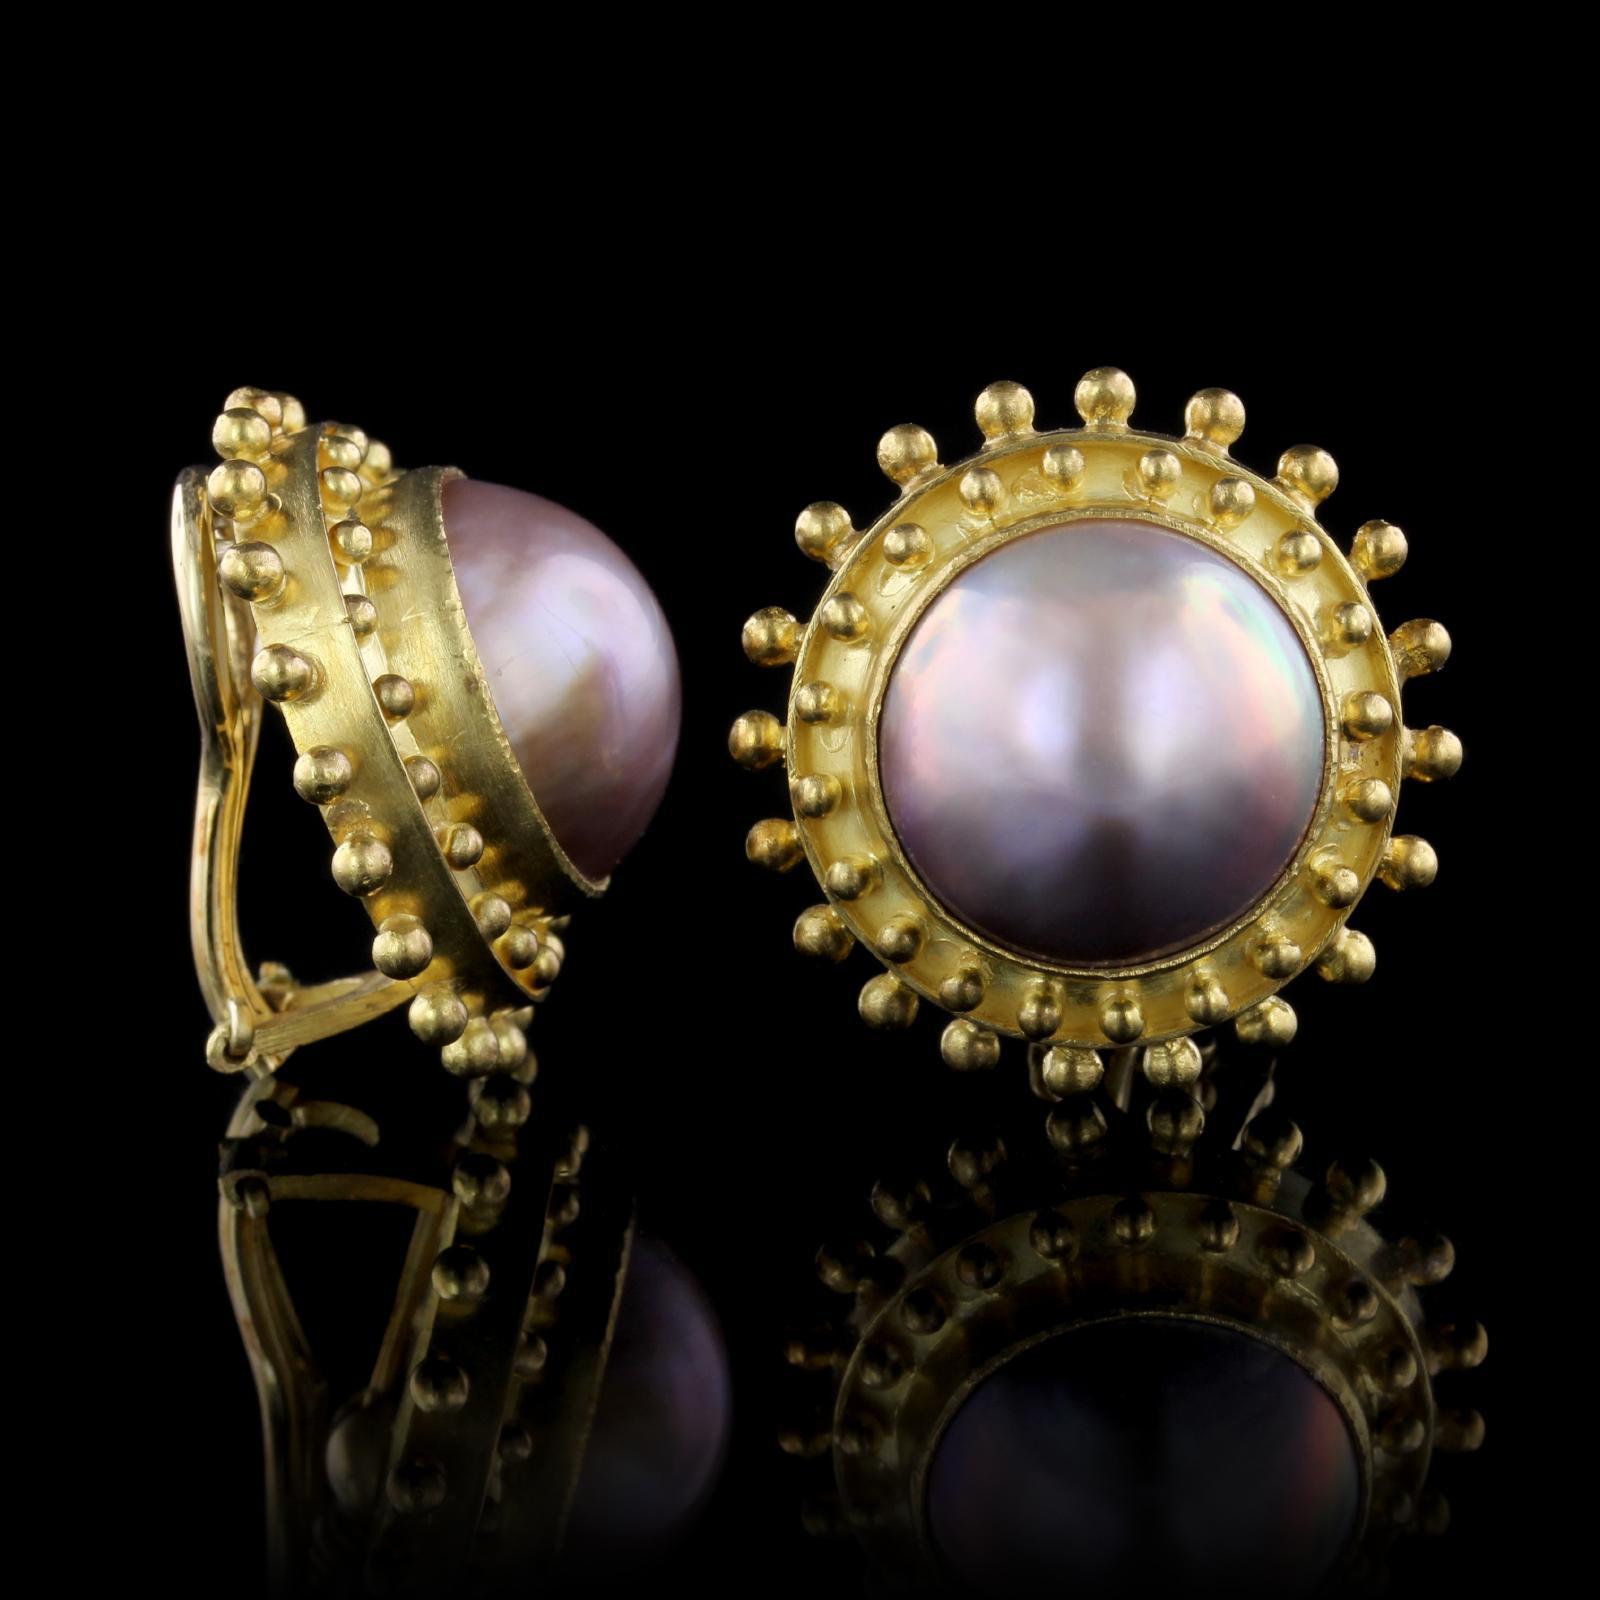 Elizabeth Locke 18K Yellow Gold Mabe Pearl Earrings. The earrings are set with two mabe pearls each measuring 15.50mm., framed by hammered gold and beaded accents, diameter 1